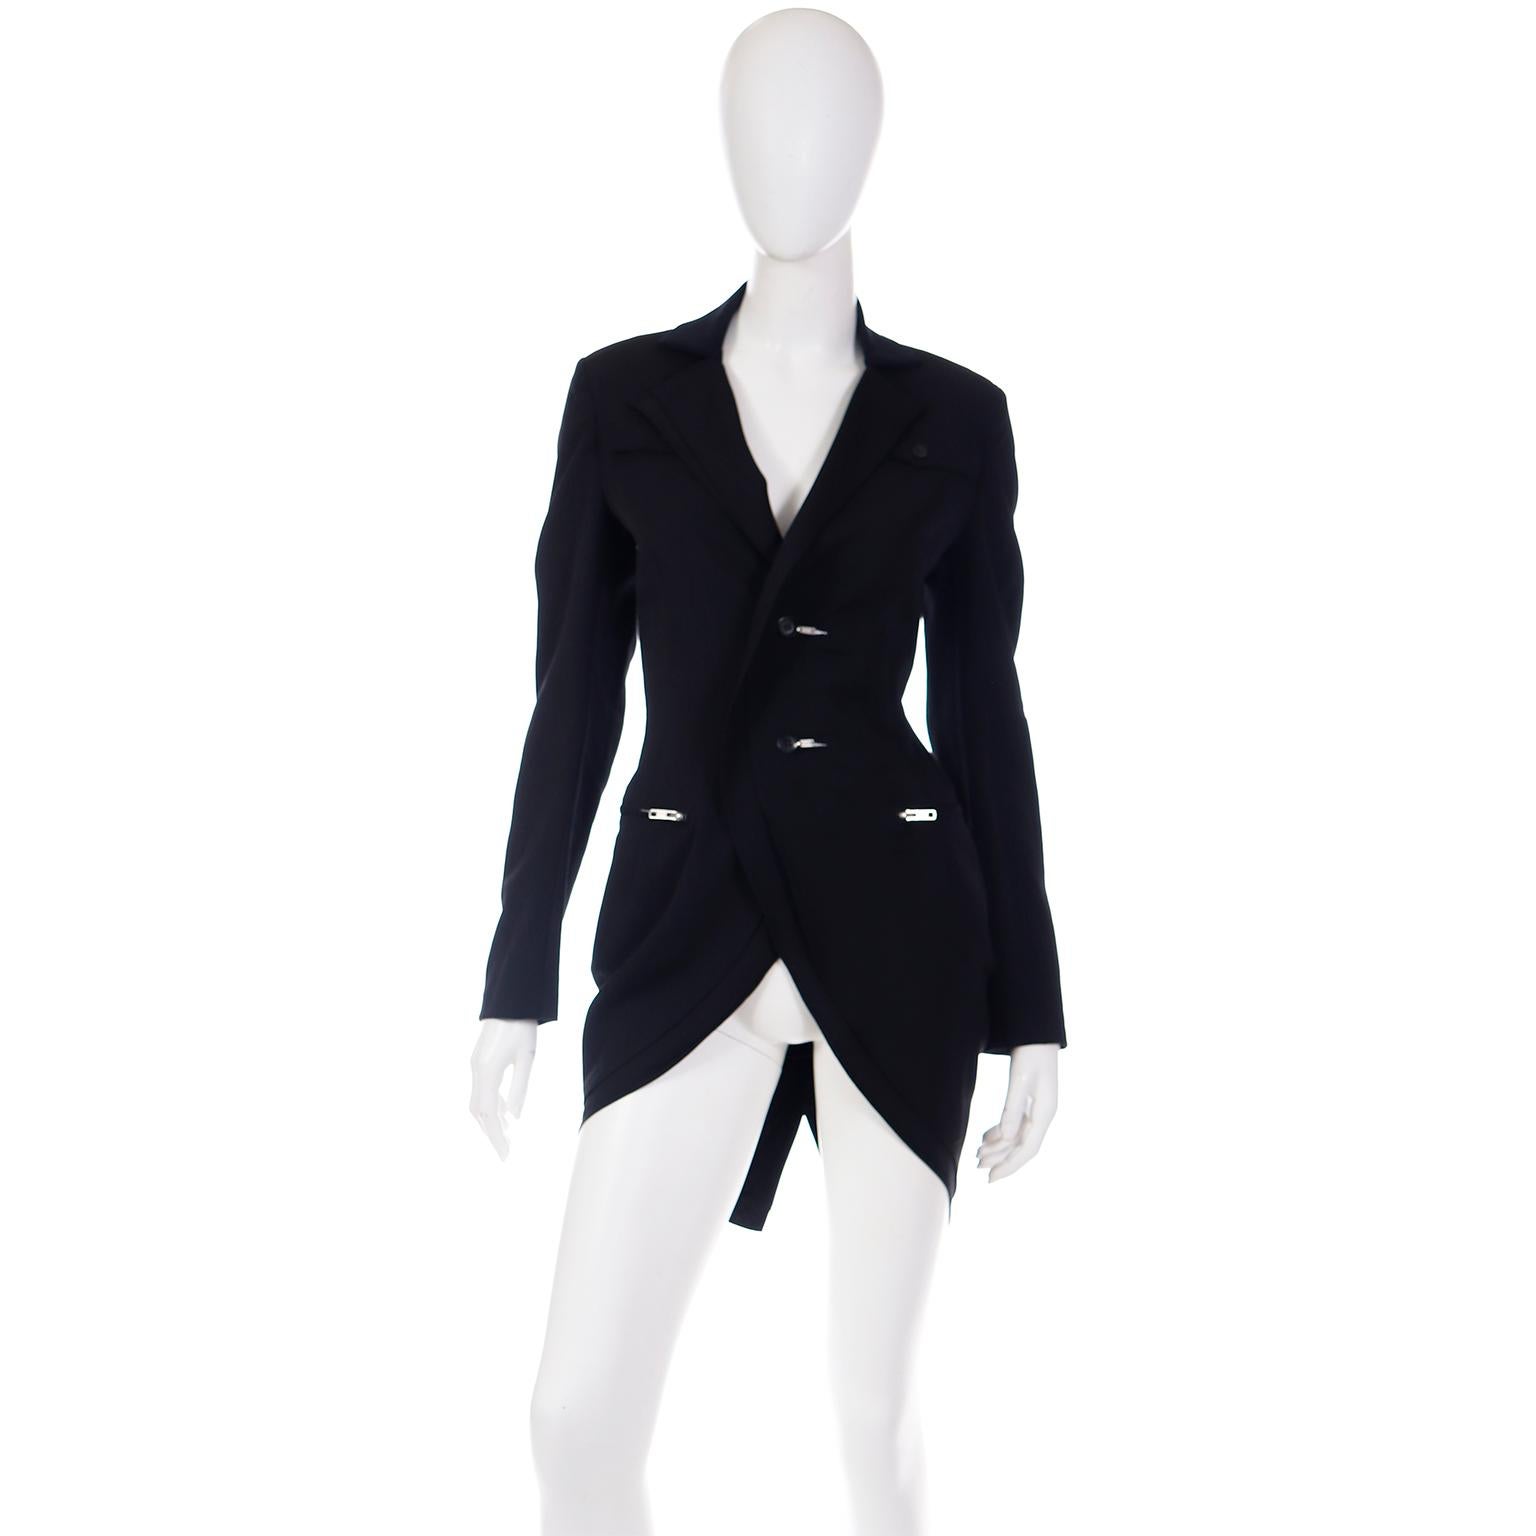 This Yohji Yamamoto avant garde black wool tuxedo style jacket has so much style! The jacket has 2 side slit pockets with zippers and it closes with two front center buttons with zippers on the button holes!  Yohji Yamamoto always included details